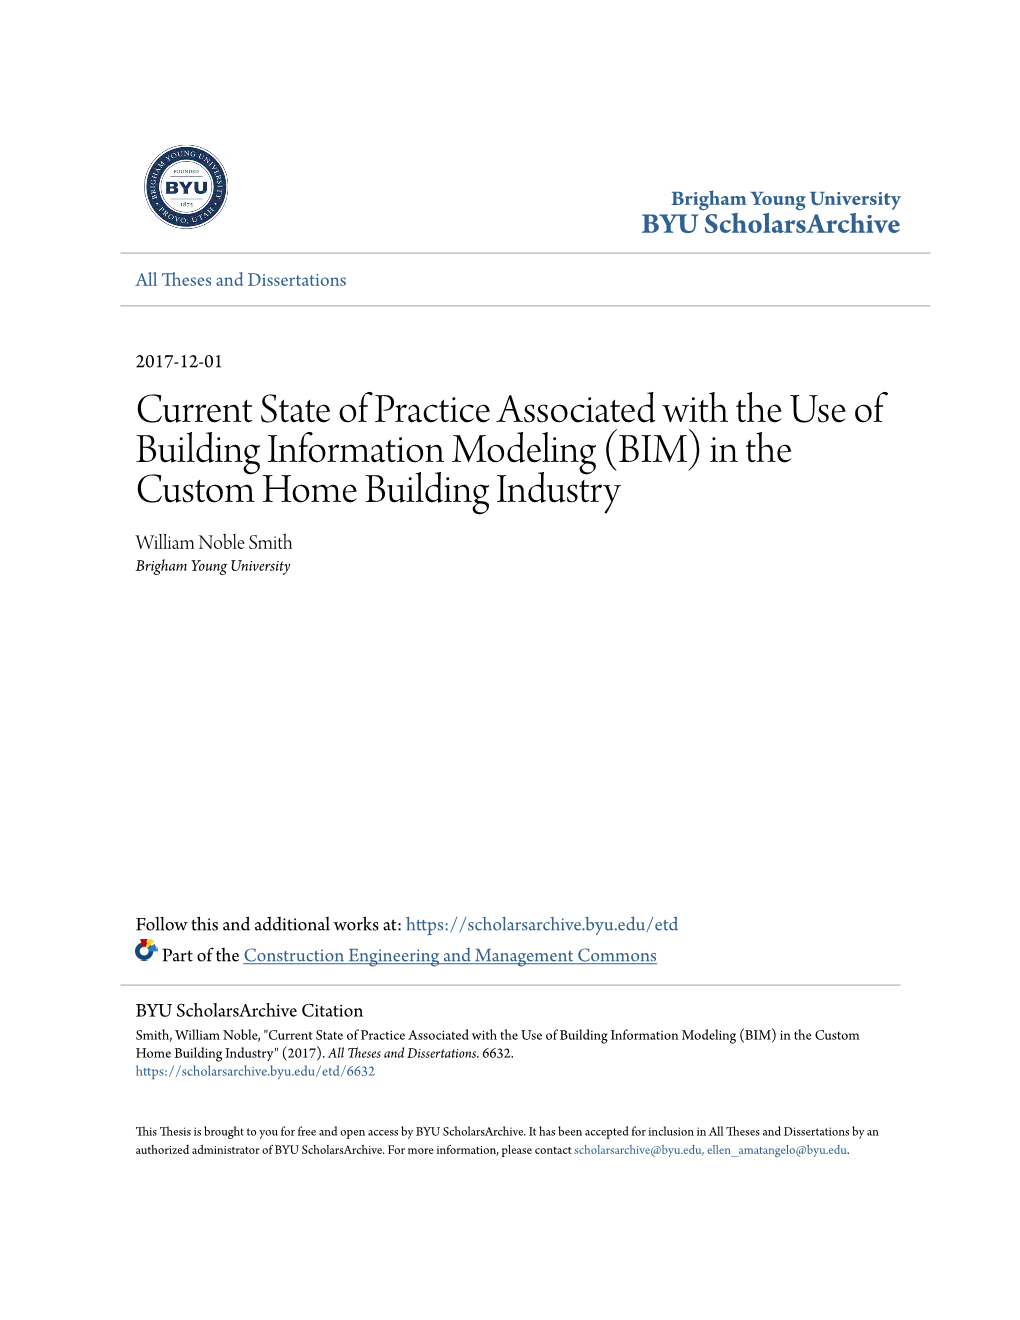 (BIM) in the Custom Home Building Industry William Noble Smith Brigham Young University